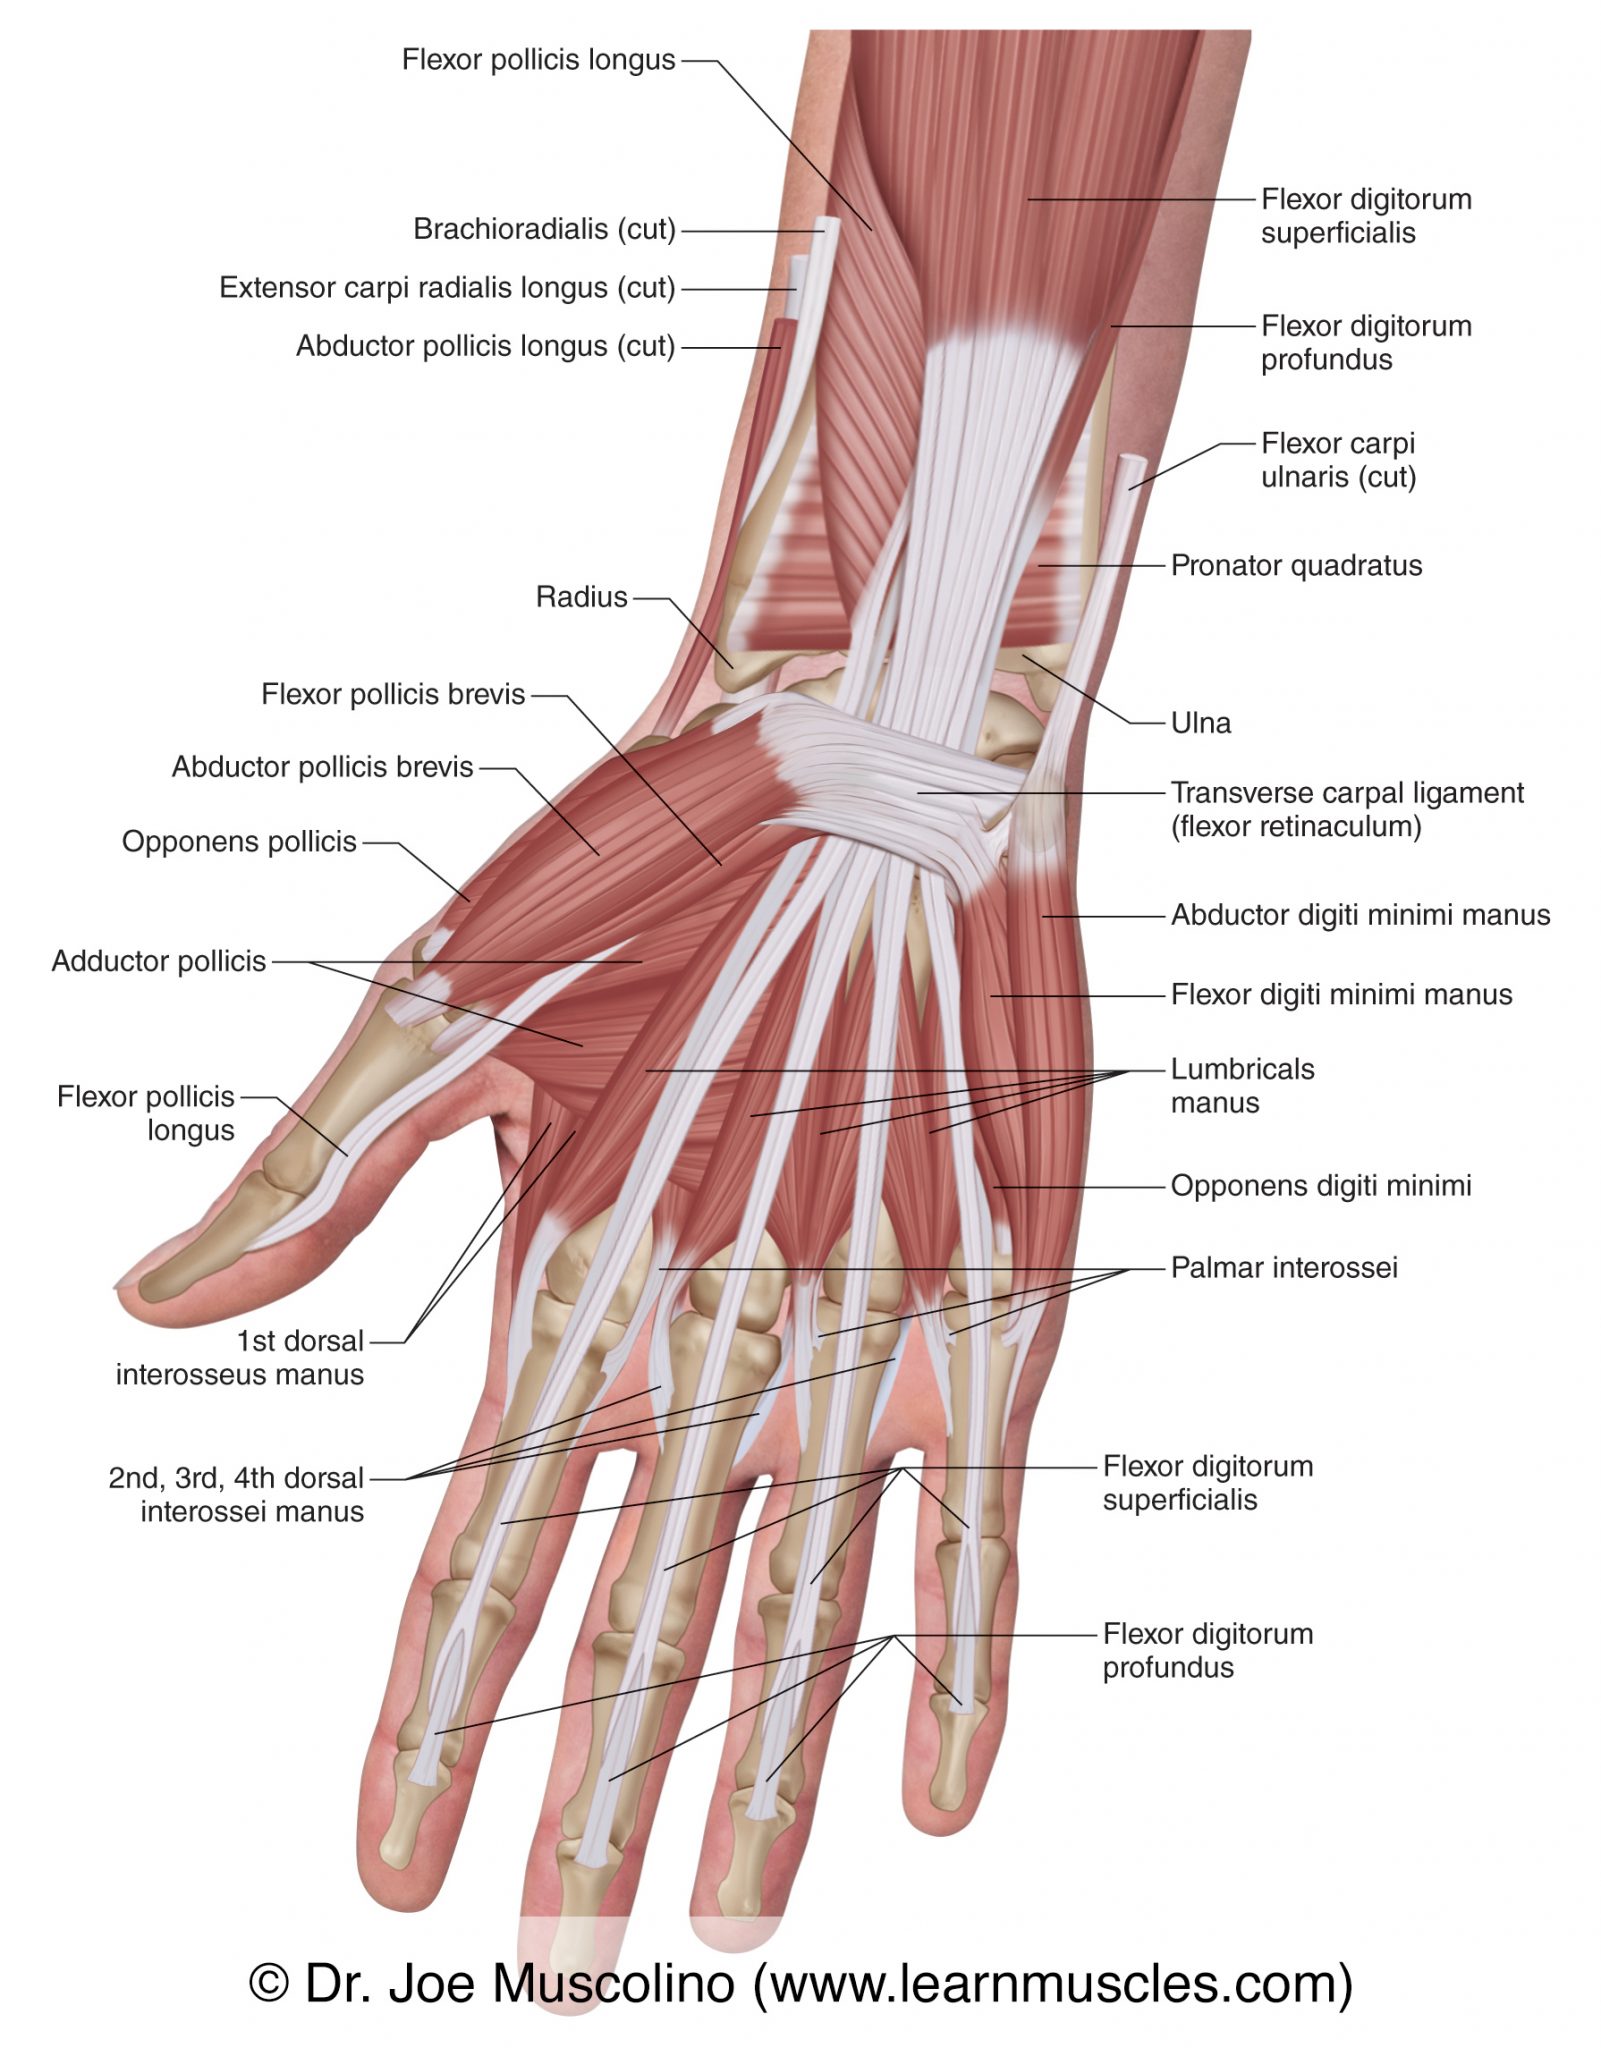 Muscles of the Anterior Hand - Superficial View - Learn Muscles